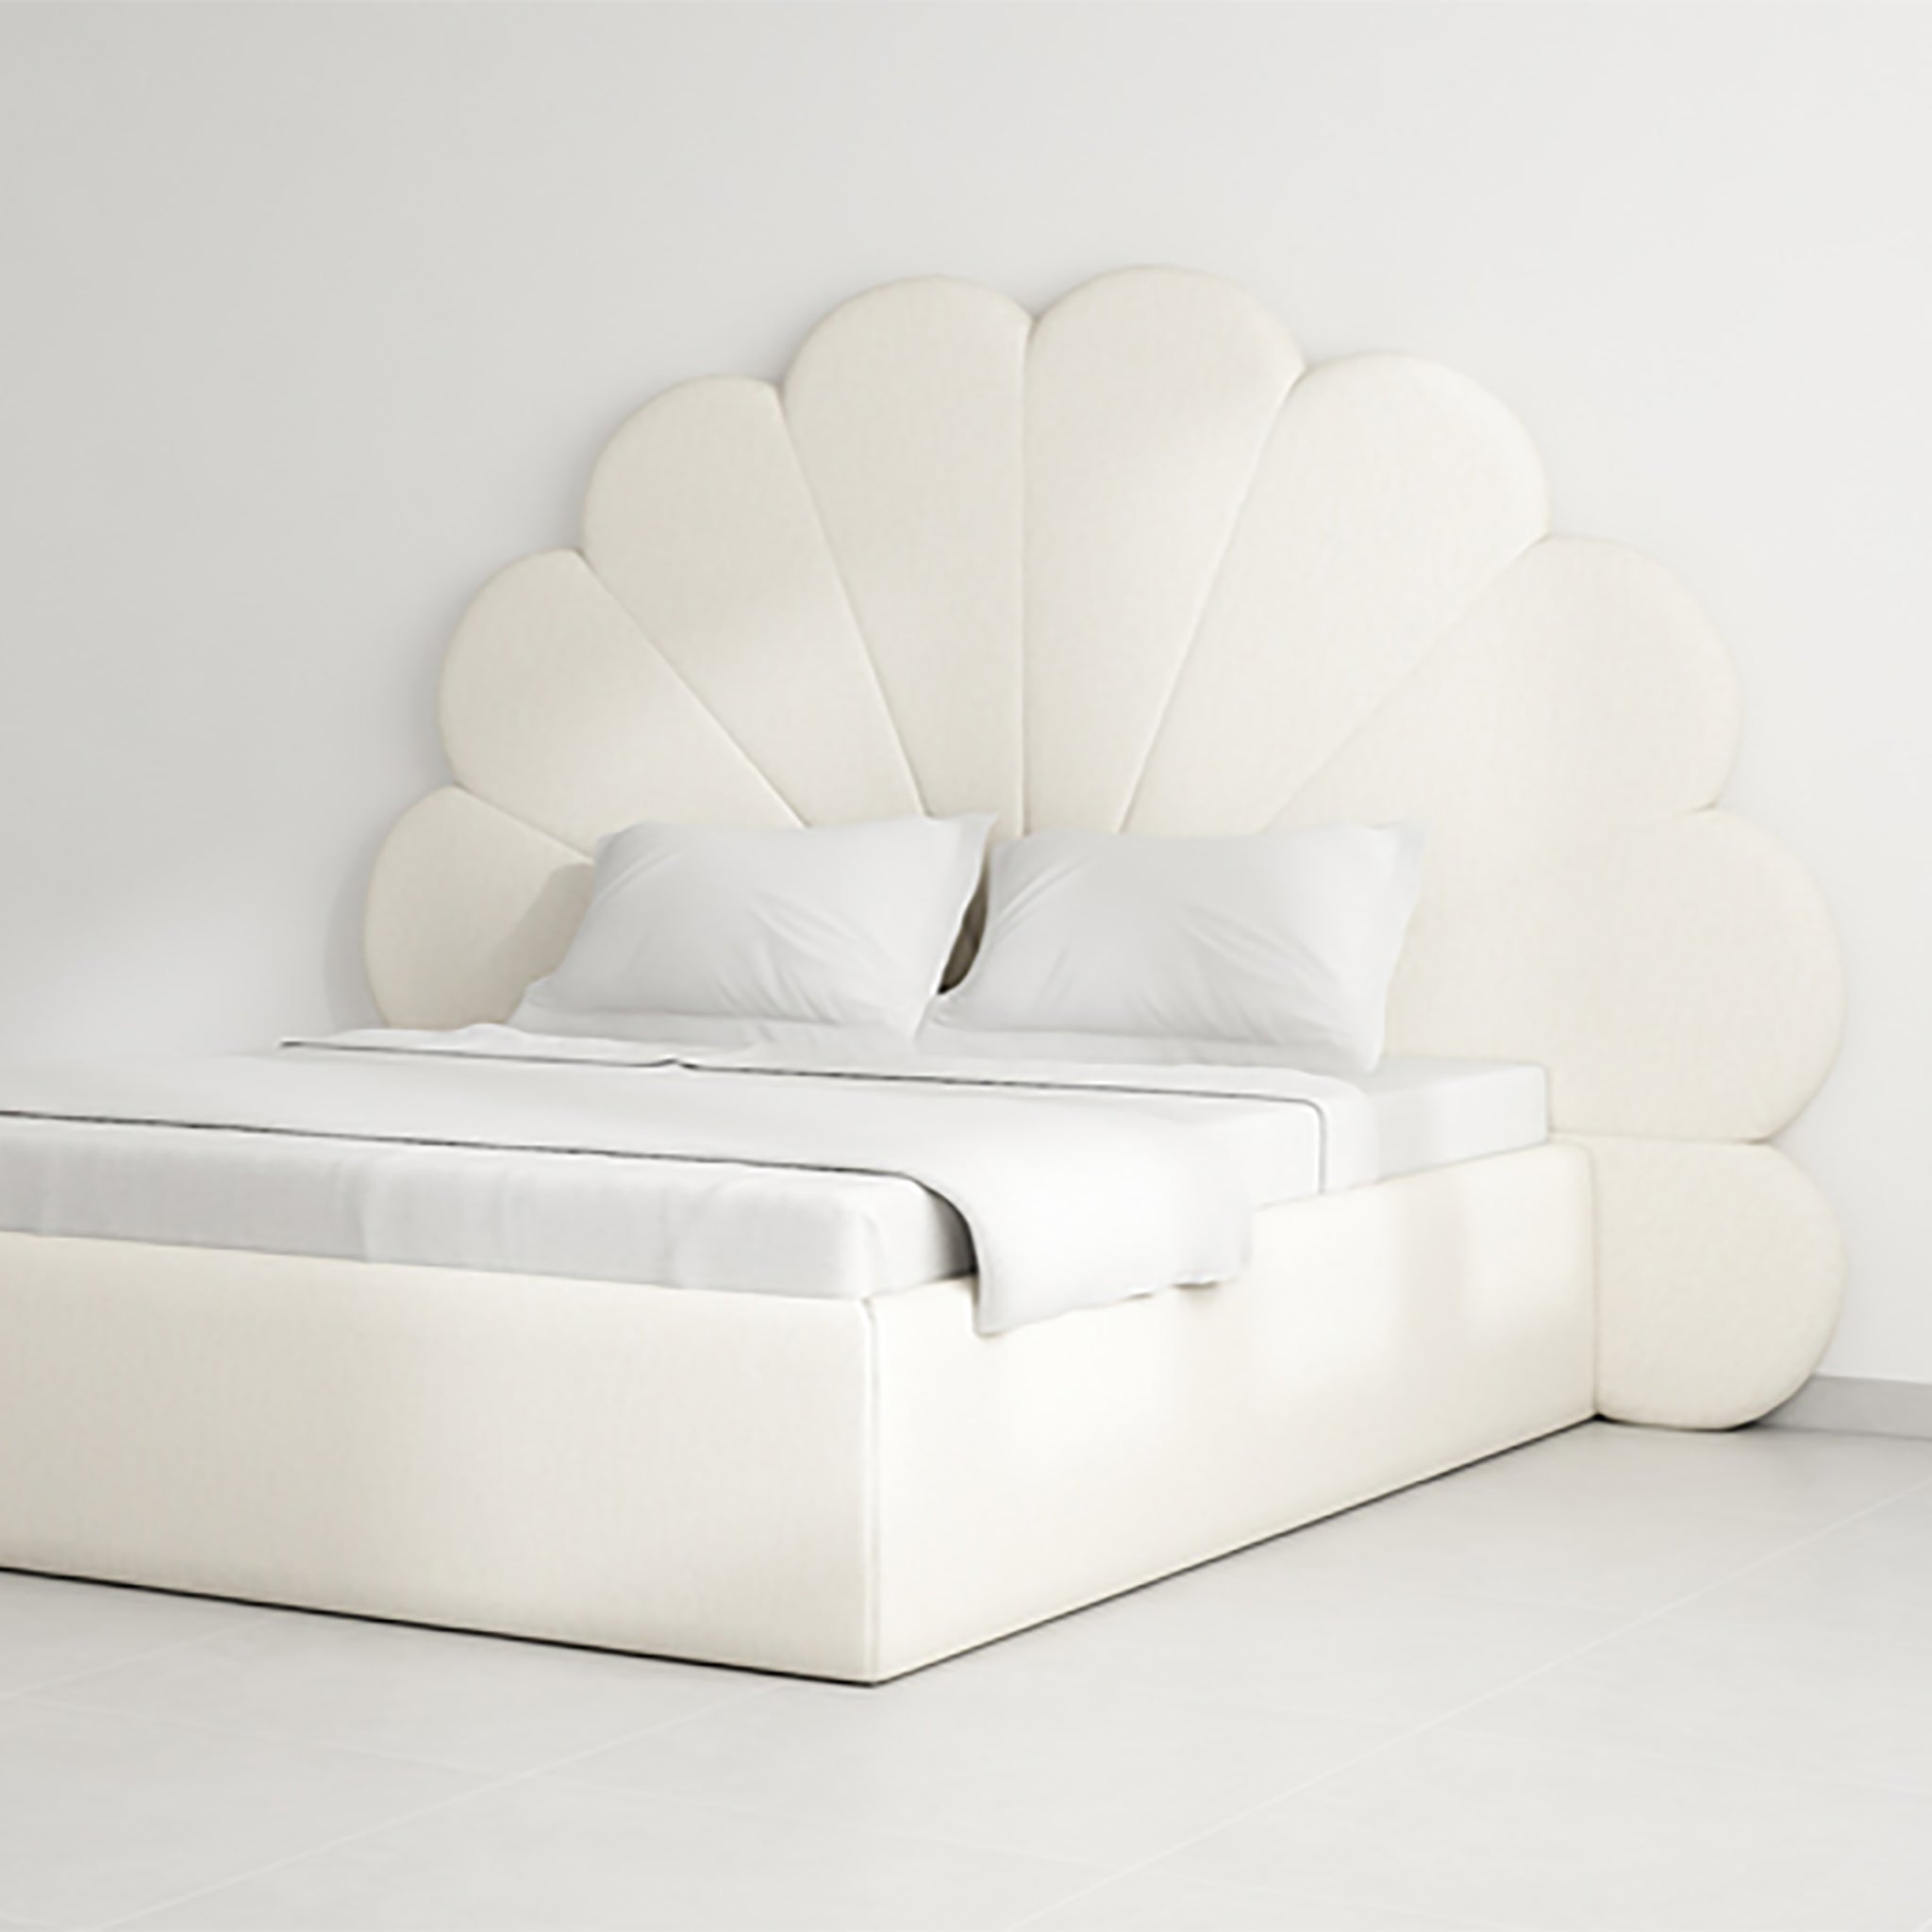 King size Kyle Bed for luxurious and restful nights